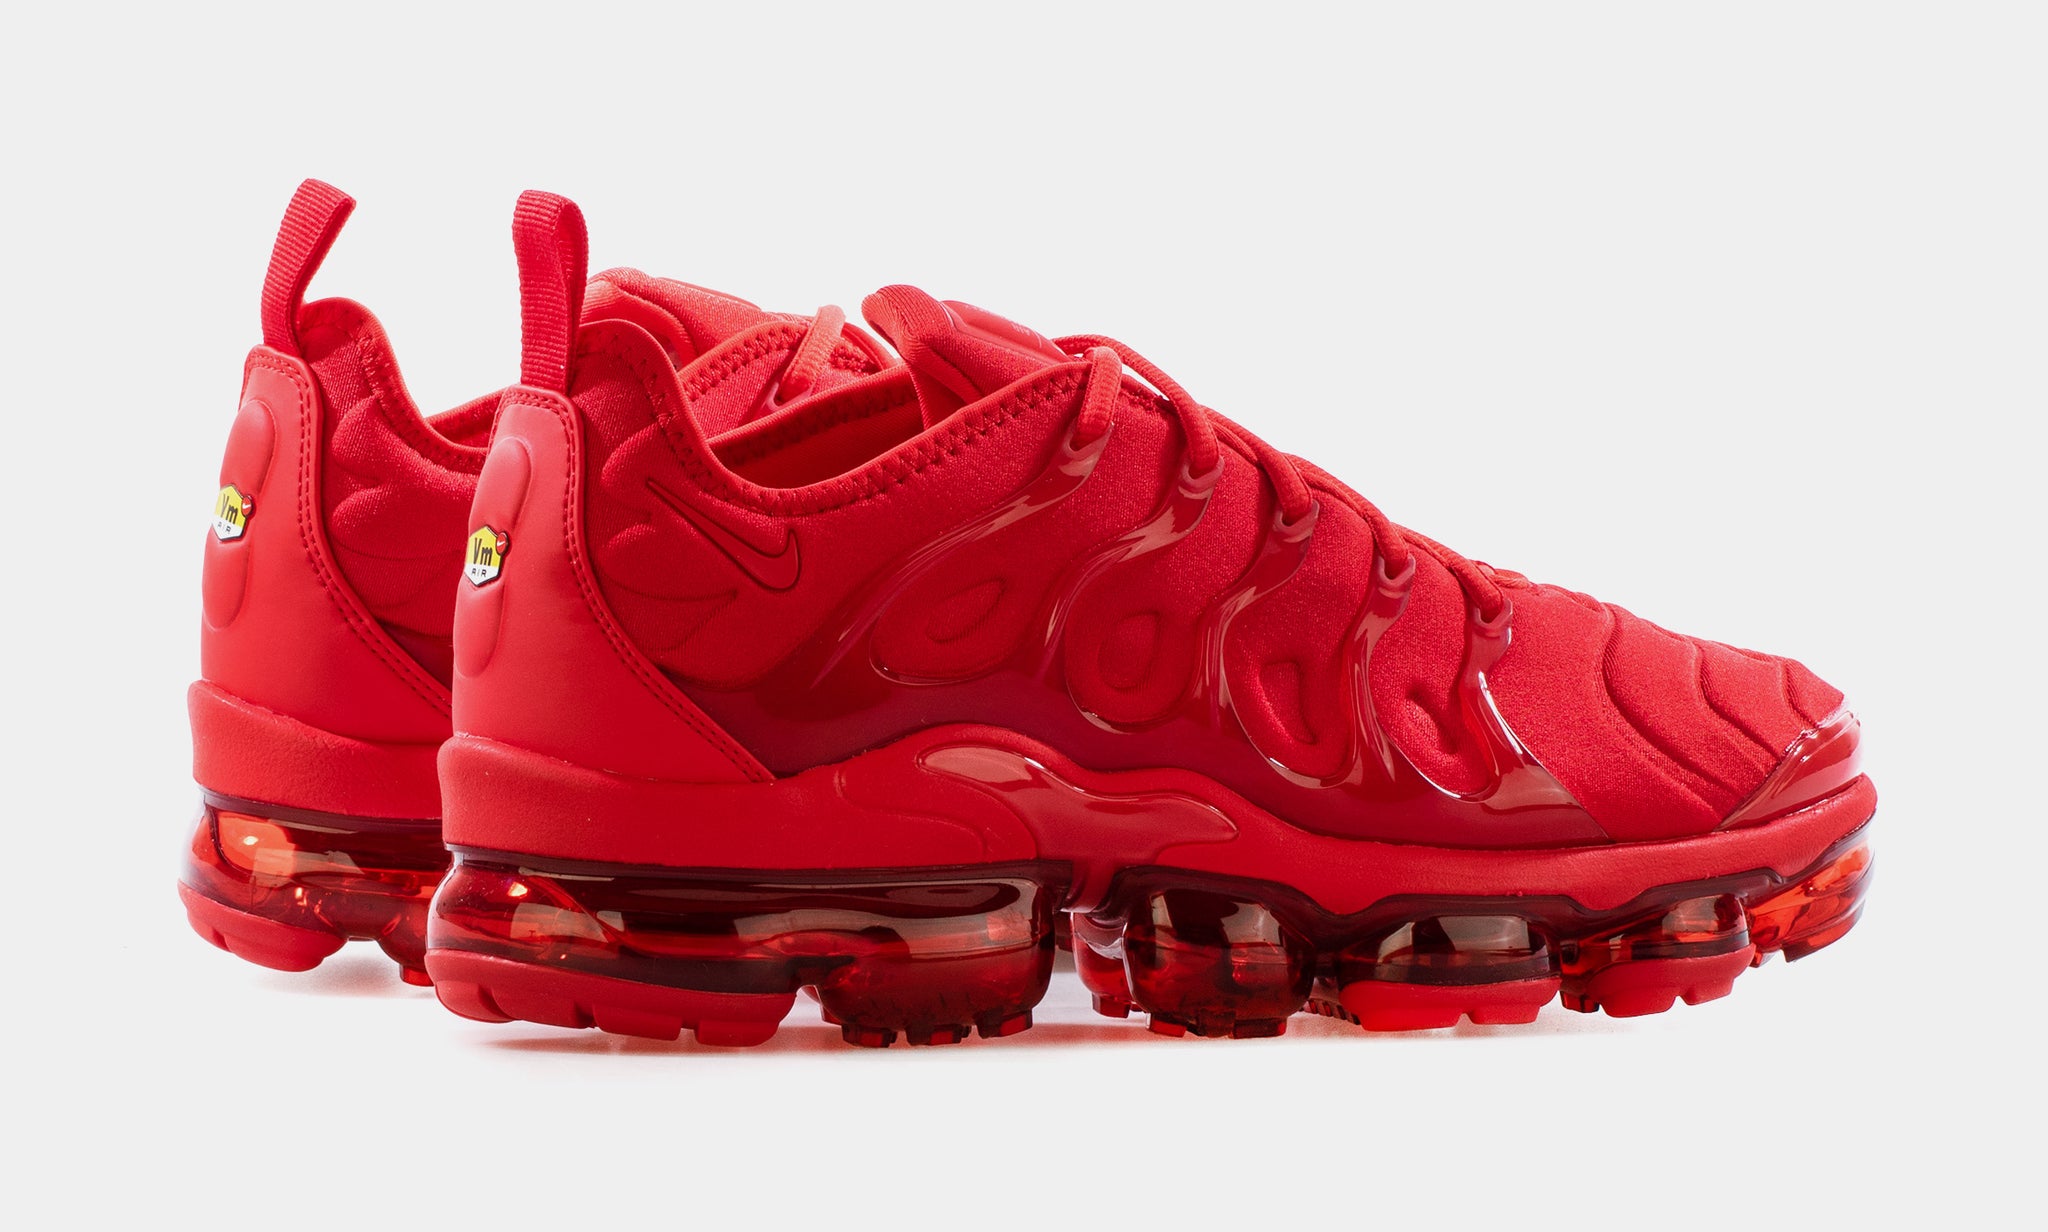 vapormax plus in red